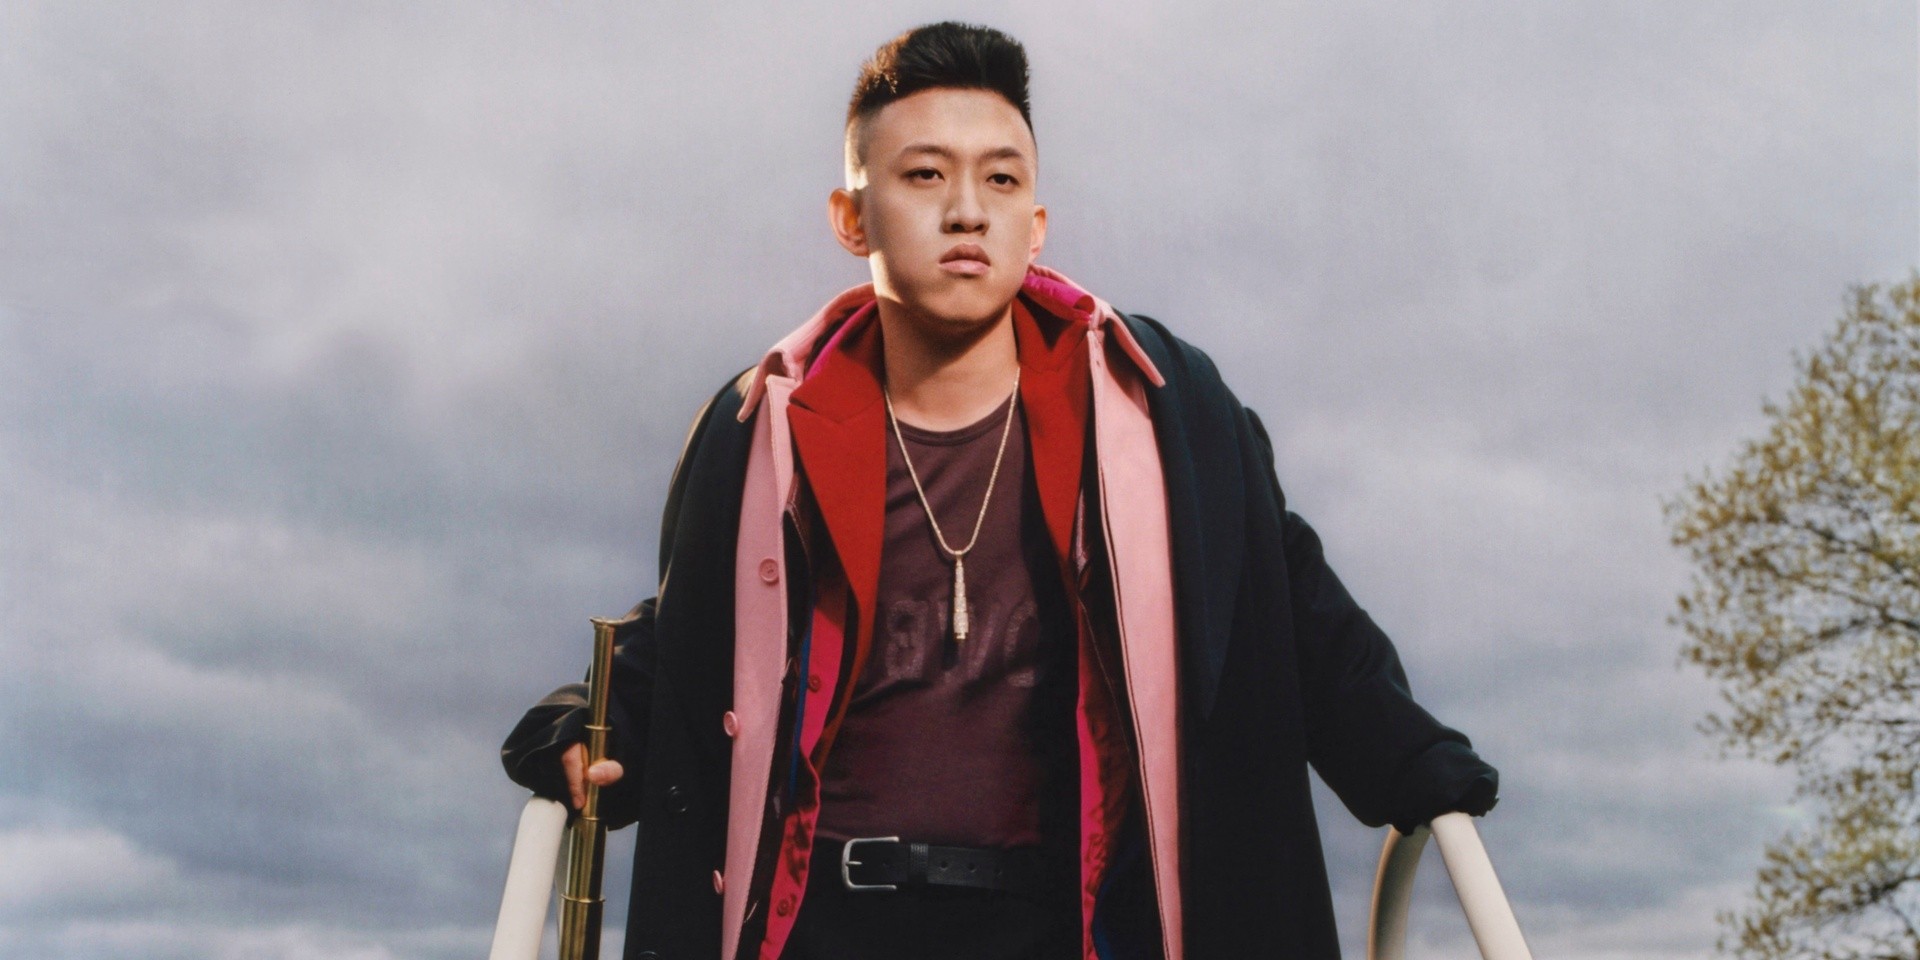 Rich Brian tackles being a role model, takes a trip down memory lane on inspirational new track 'Kids' – listen 